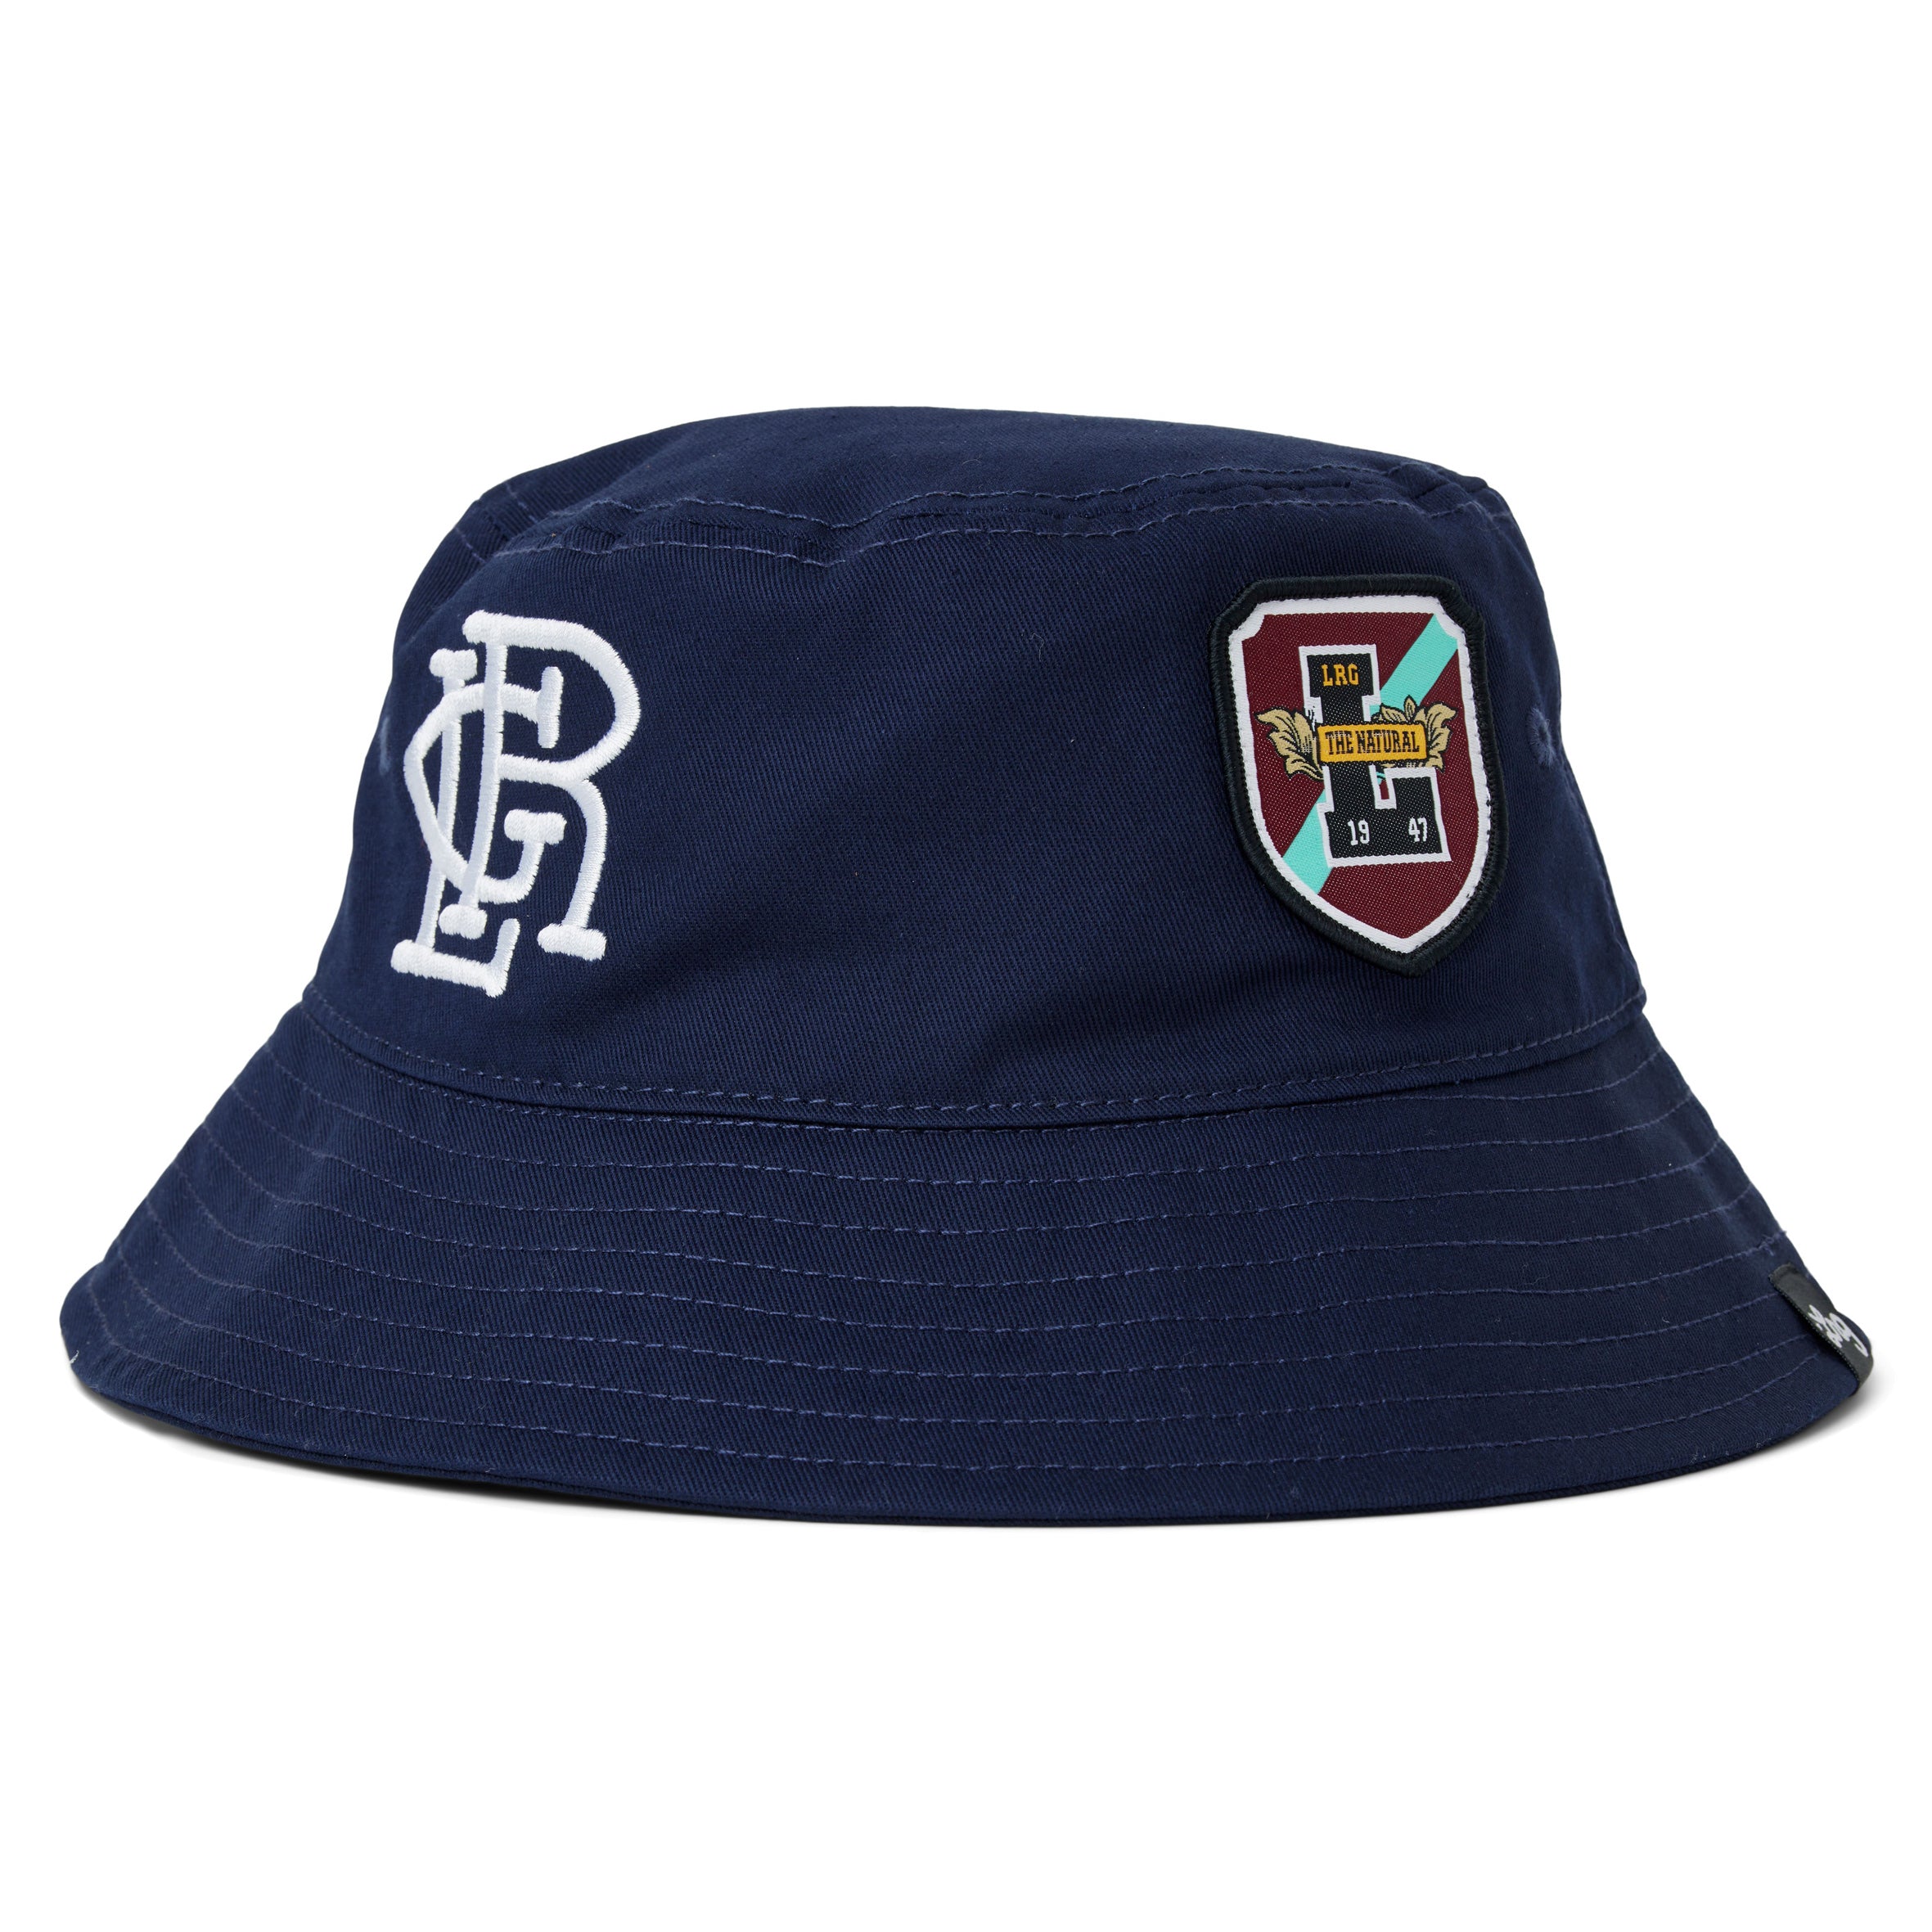 LRG PATCHED UP BUCKET HAT - NAVY | LRG Clothing